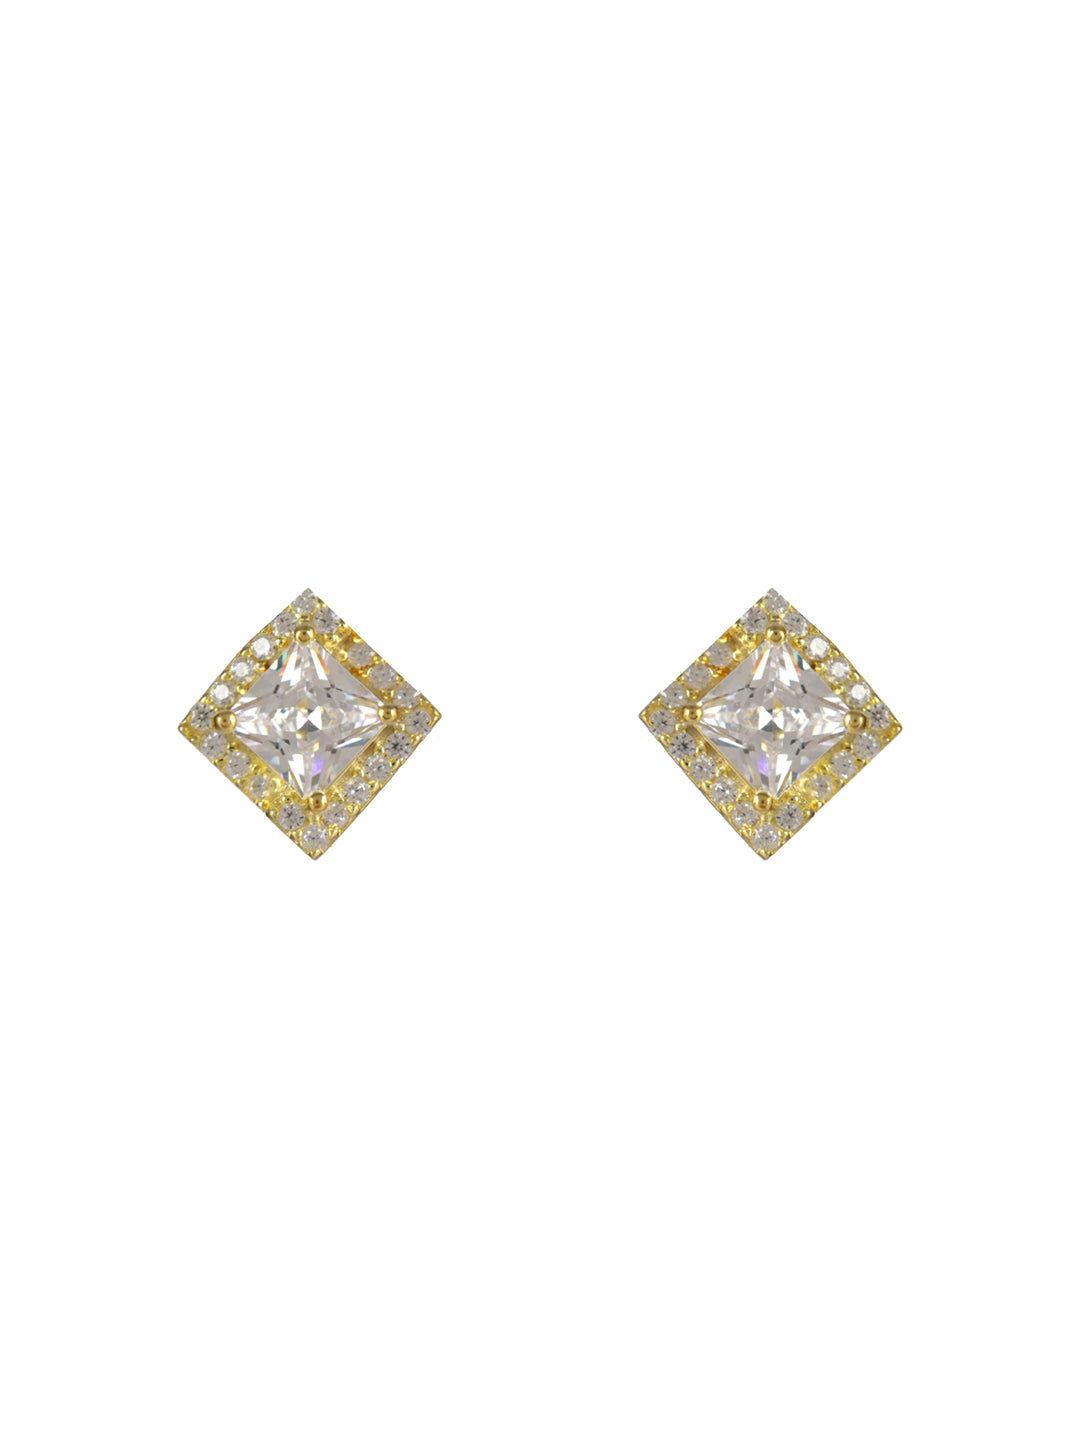 Sheer by Priyaasi Square Solitaire Gold-Plated Sterling Silver Earrings